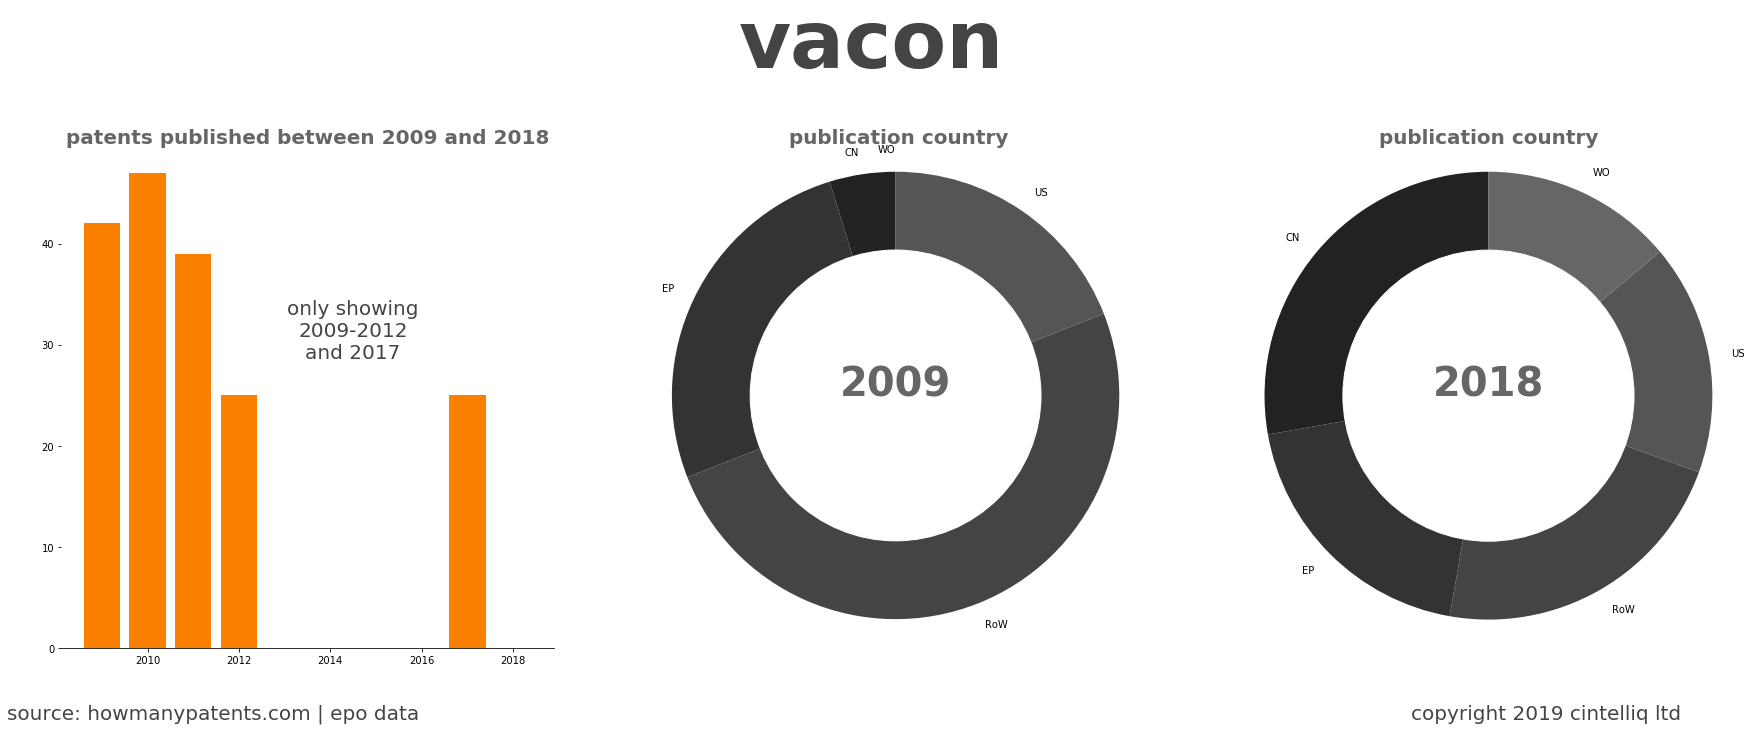 summary of patents for Vacon